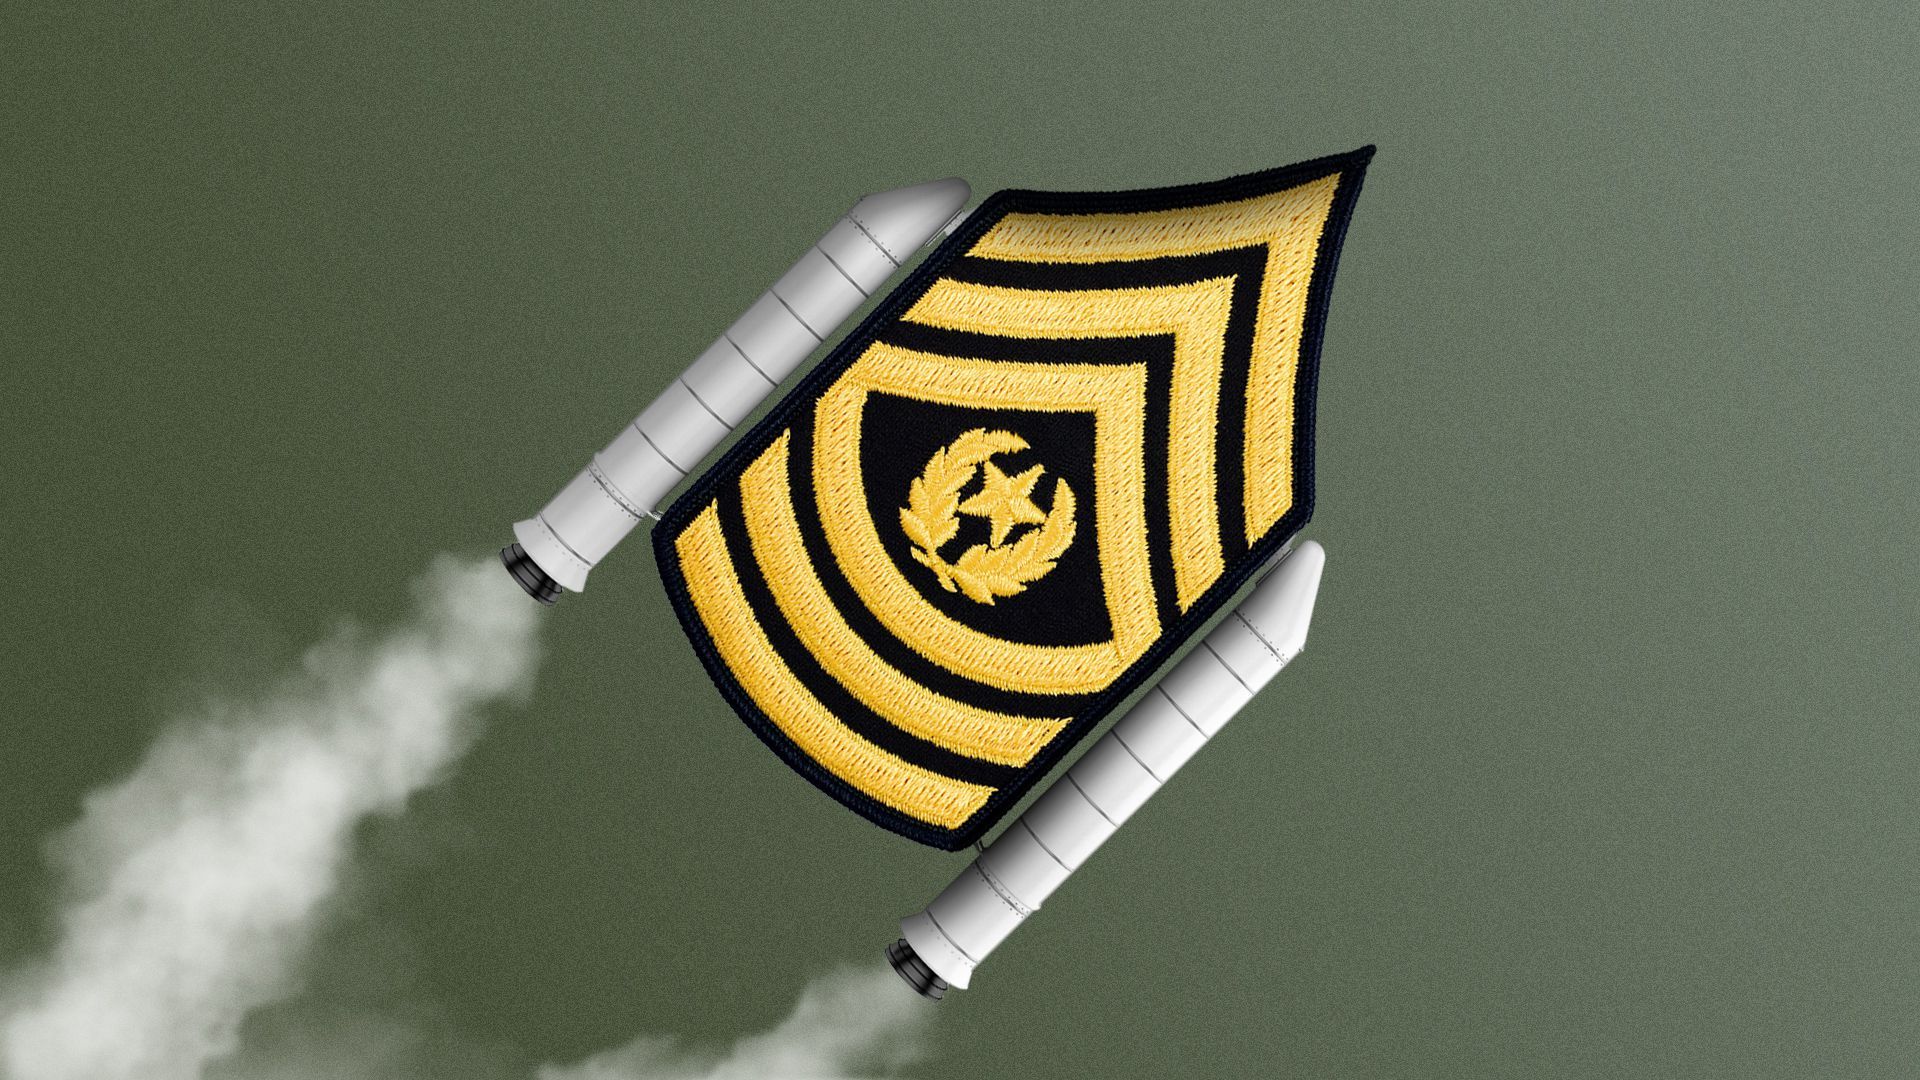 Illustration of a sewn military badge fashioned as a rocket. 